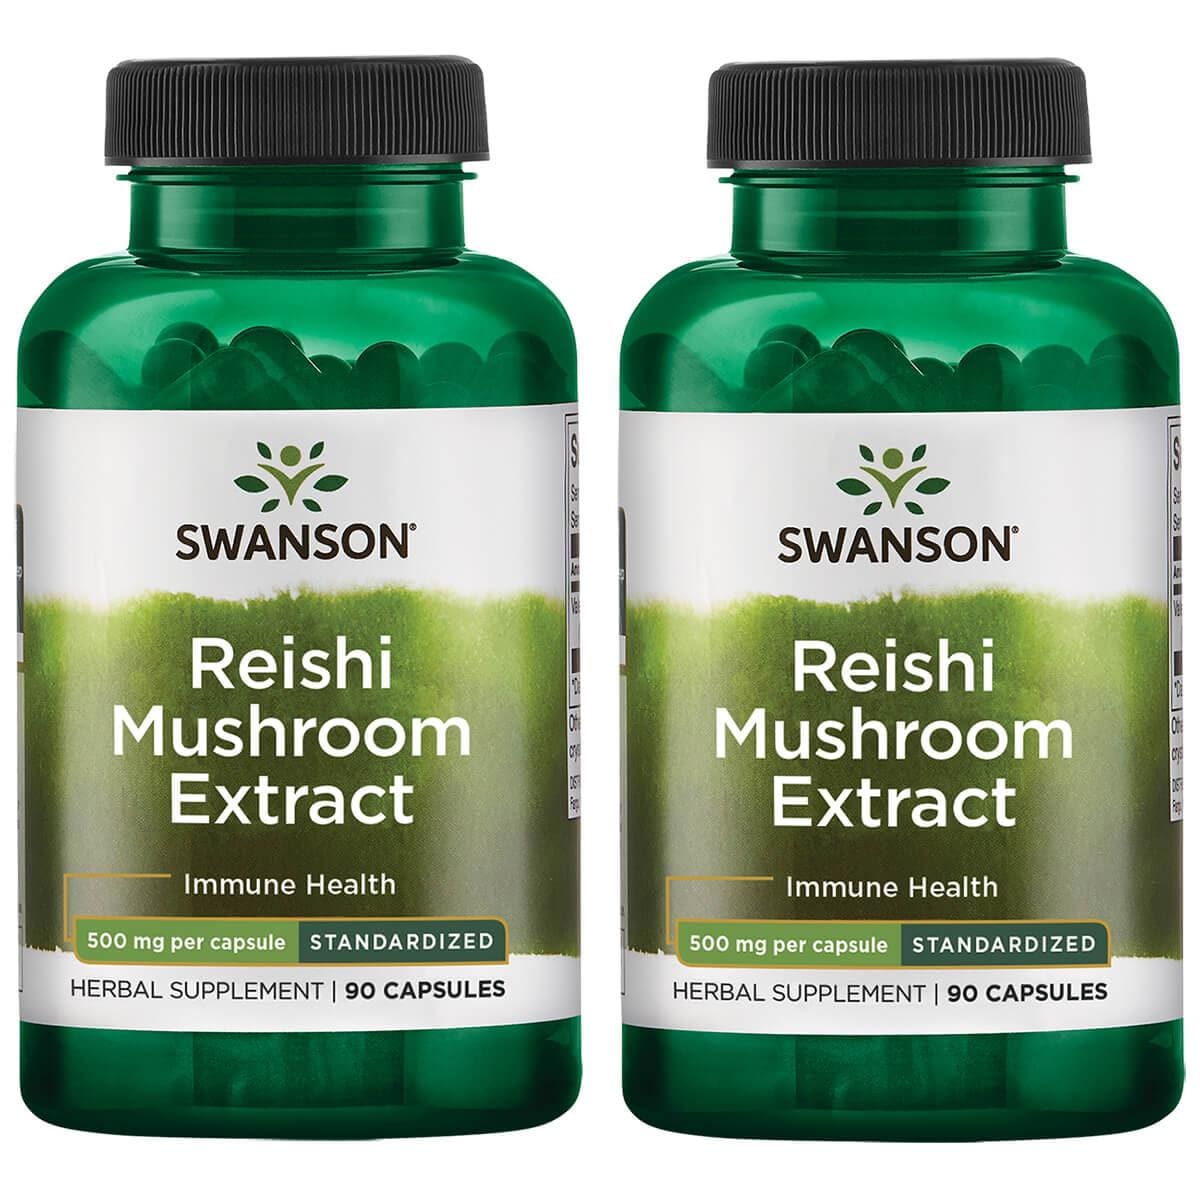 Swanson Superior Herbs Reishi Mushroom Extract - Standardized 2 Pack Vitamin 500 mg 90 Caps Herbs and Supplements